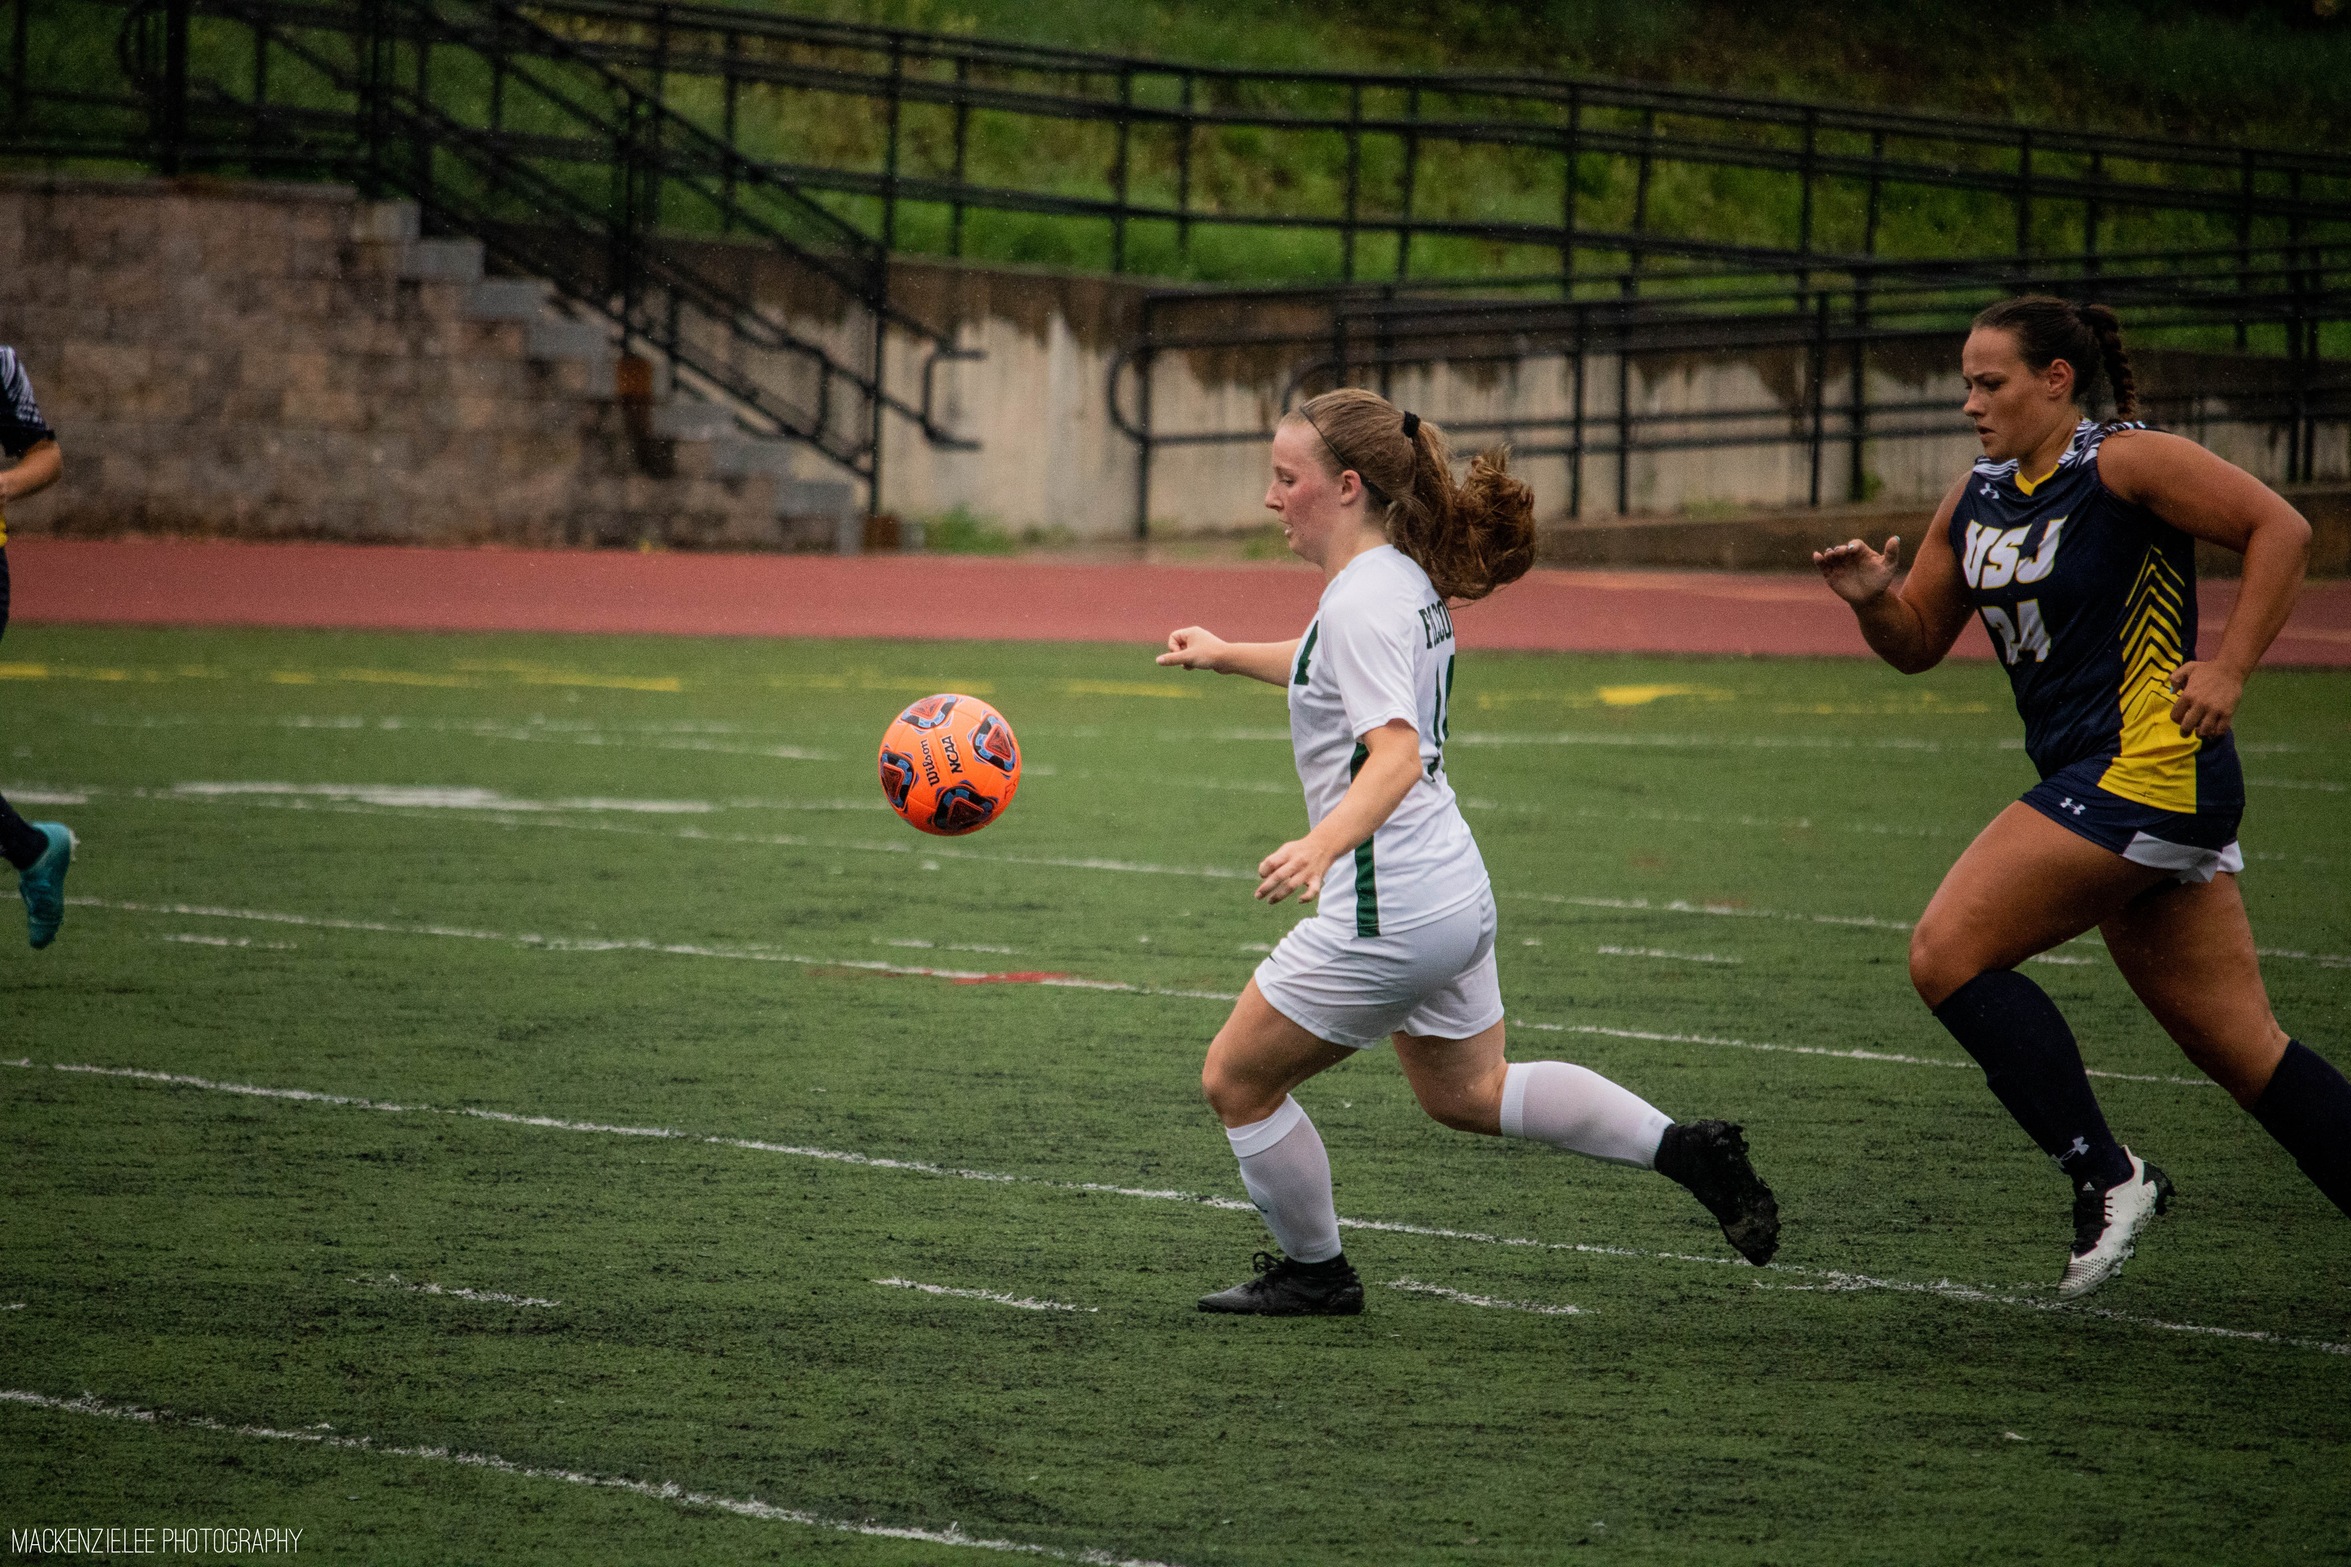 Falcons Draw Even With Buccaneers, 0-0 In MASCAC Action